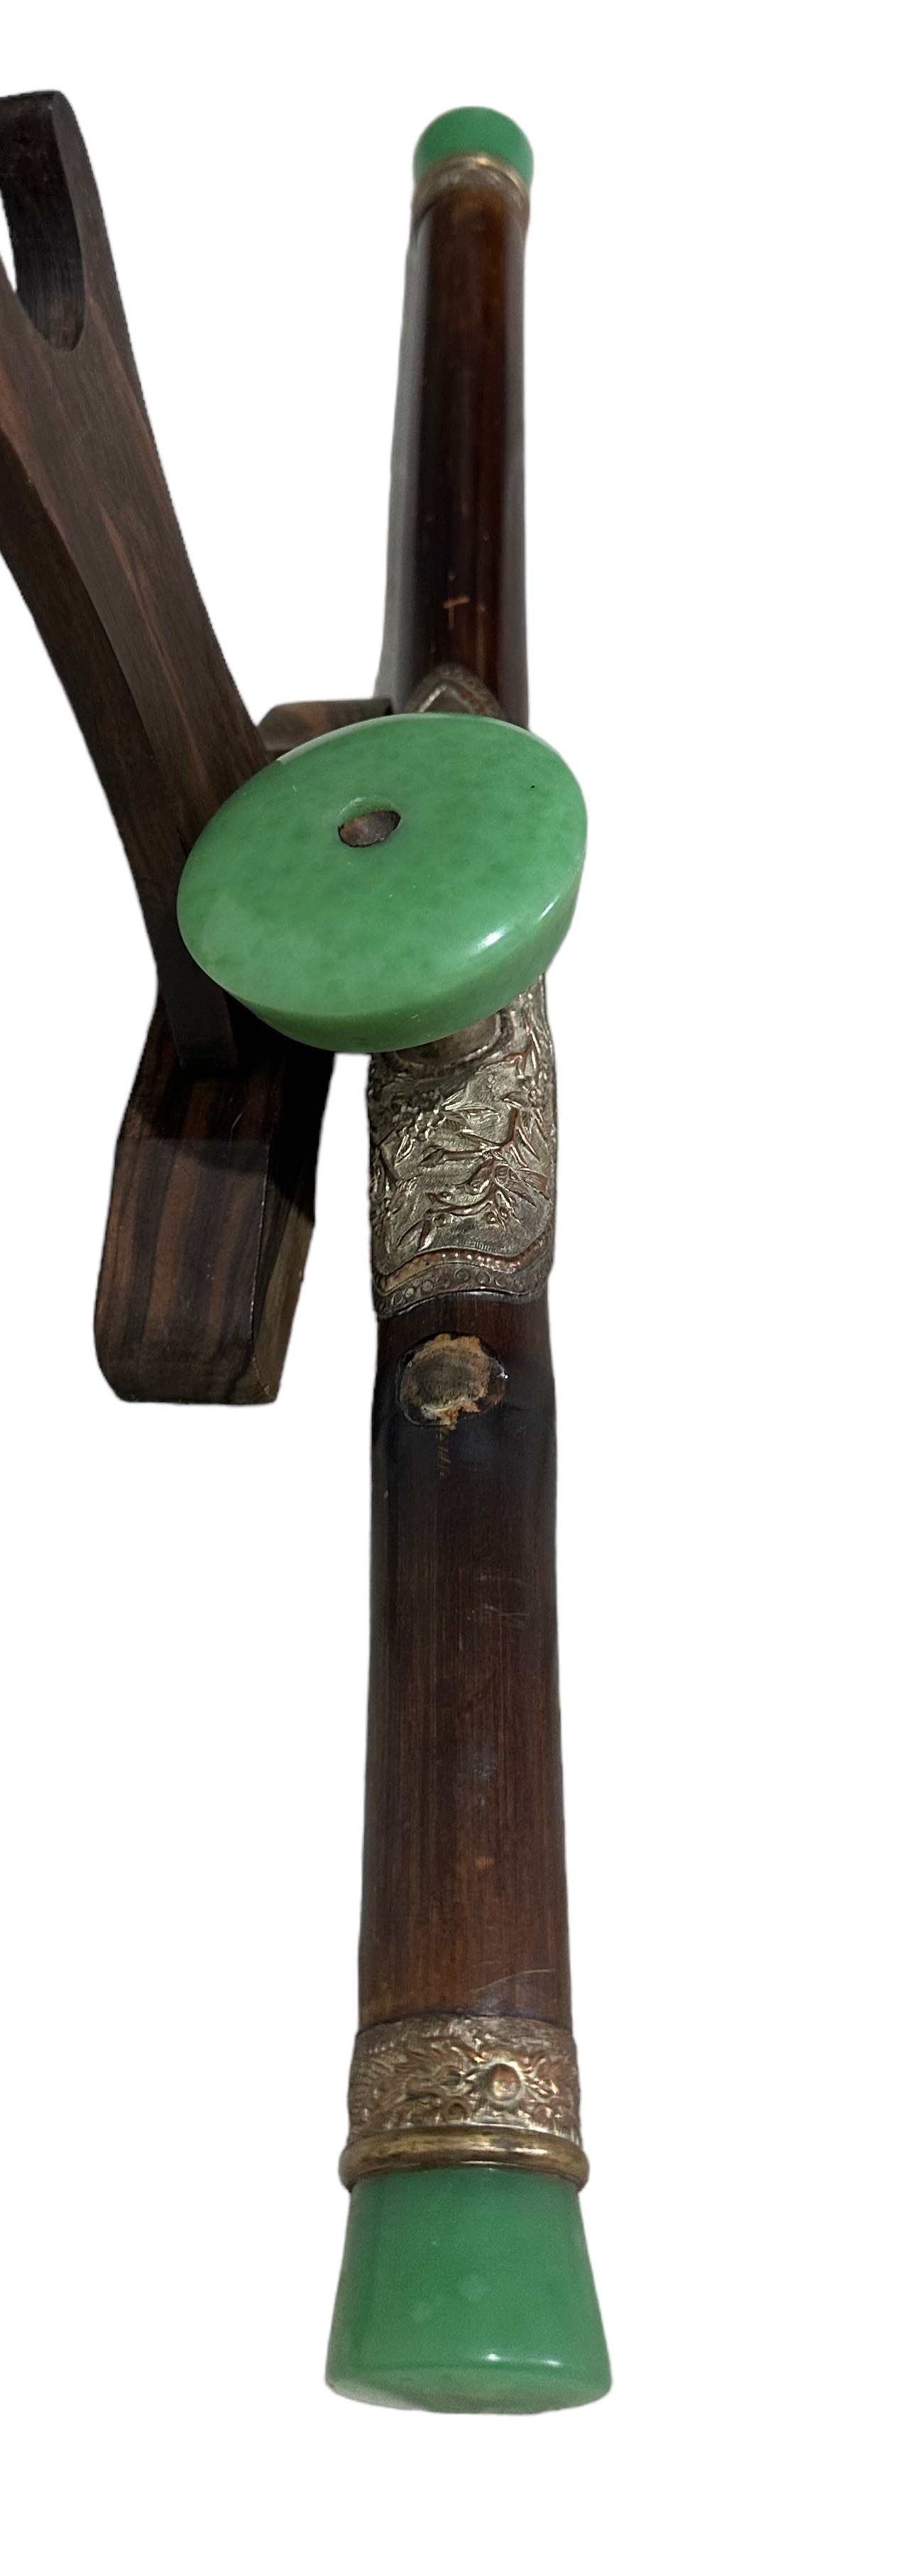 Lot of Opium Pipe with Jade Fittings on Stand-Bone and Wood Opium Pipes+2 Resin examples - Image 3 of 11